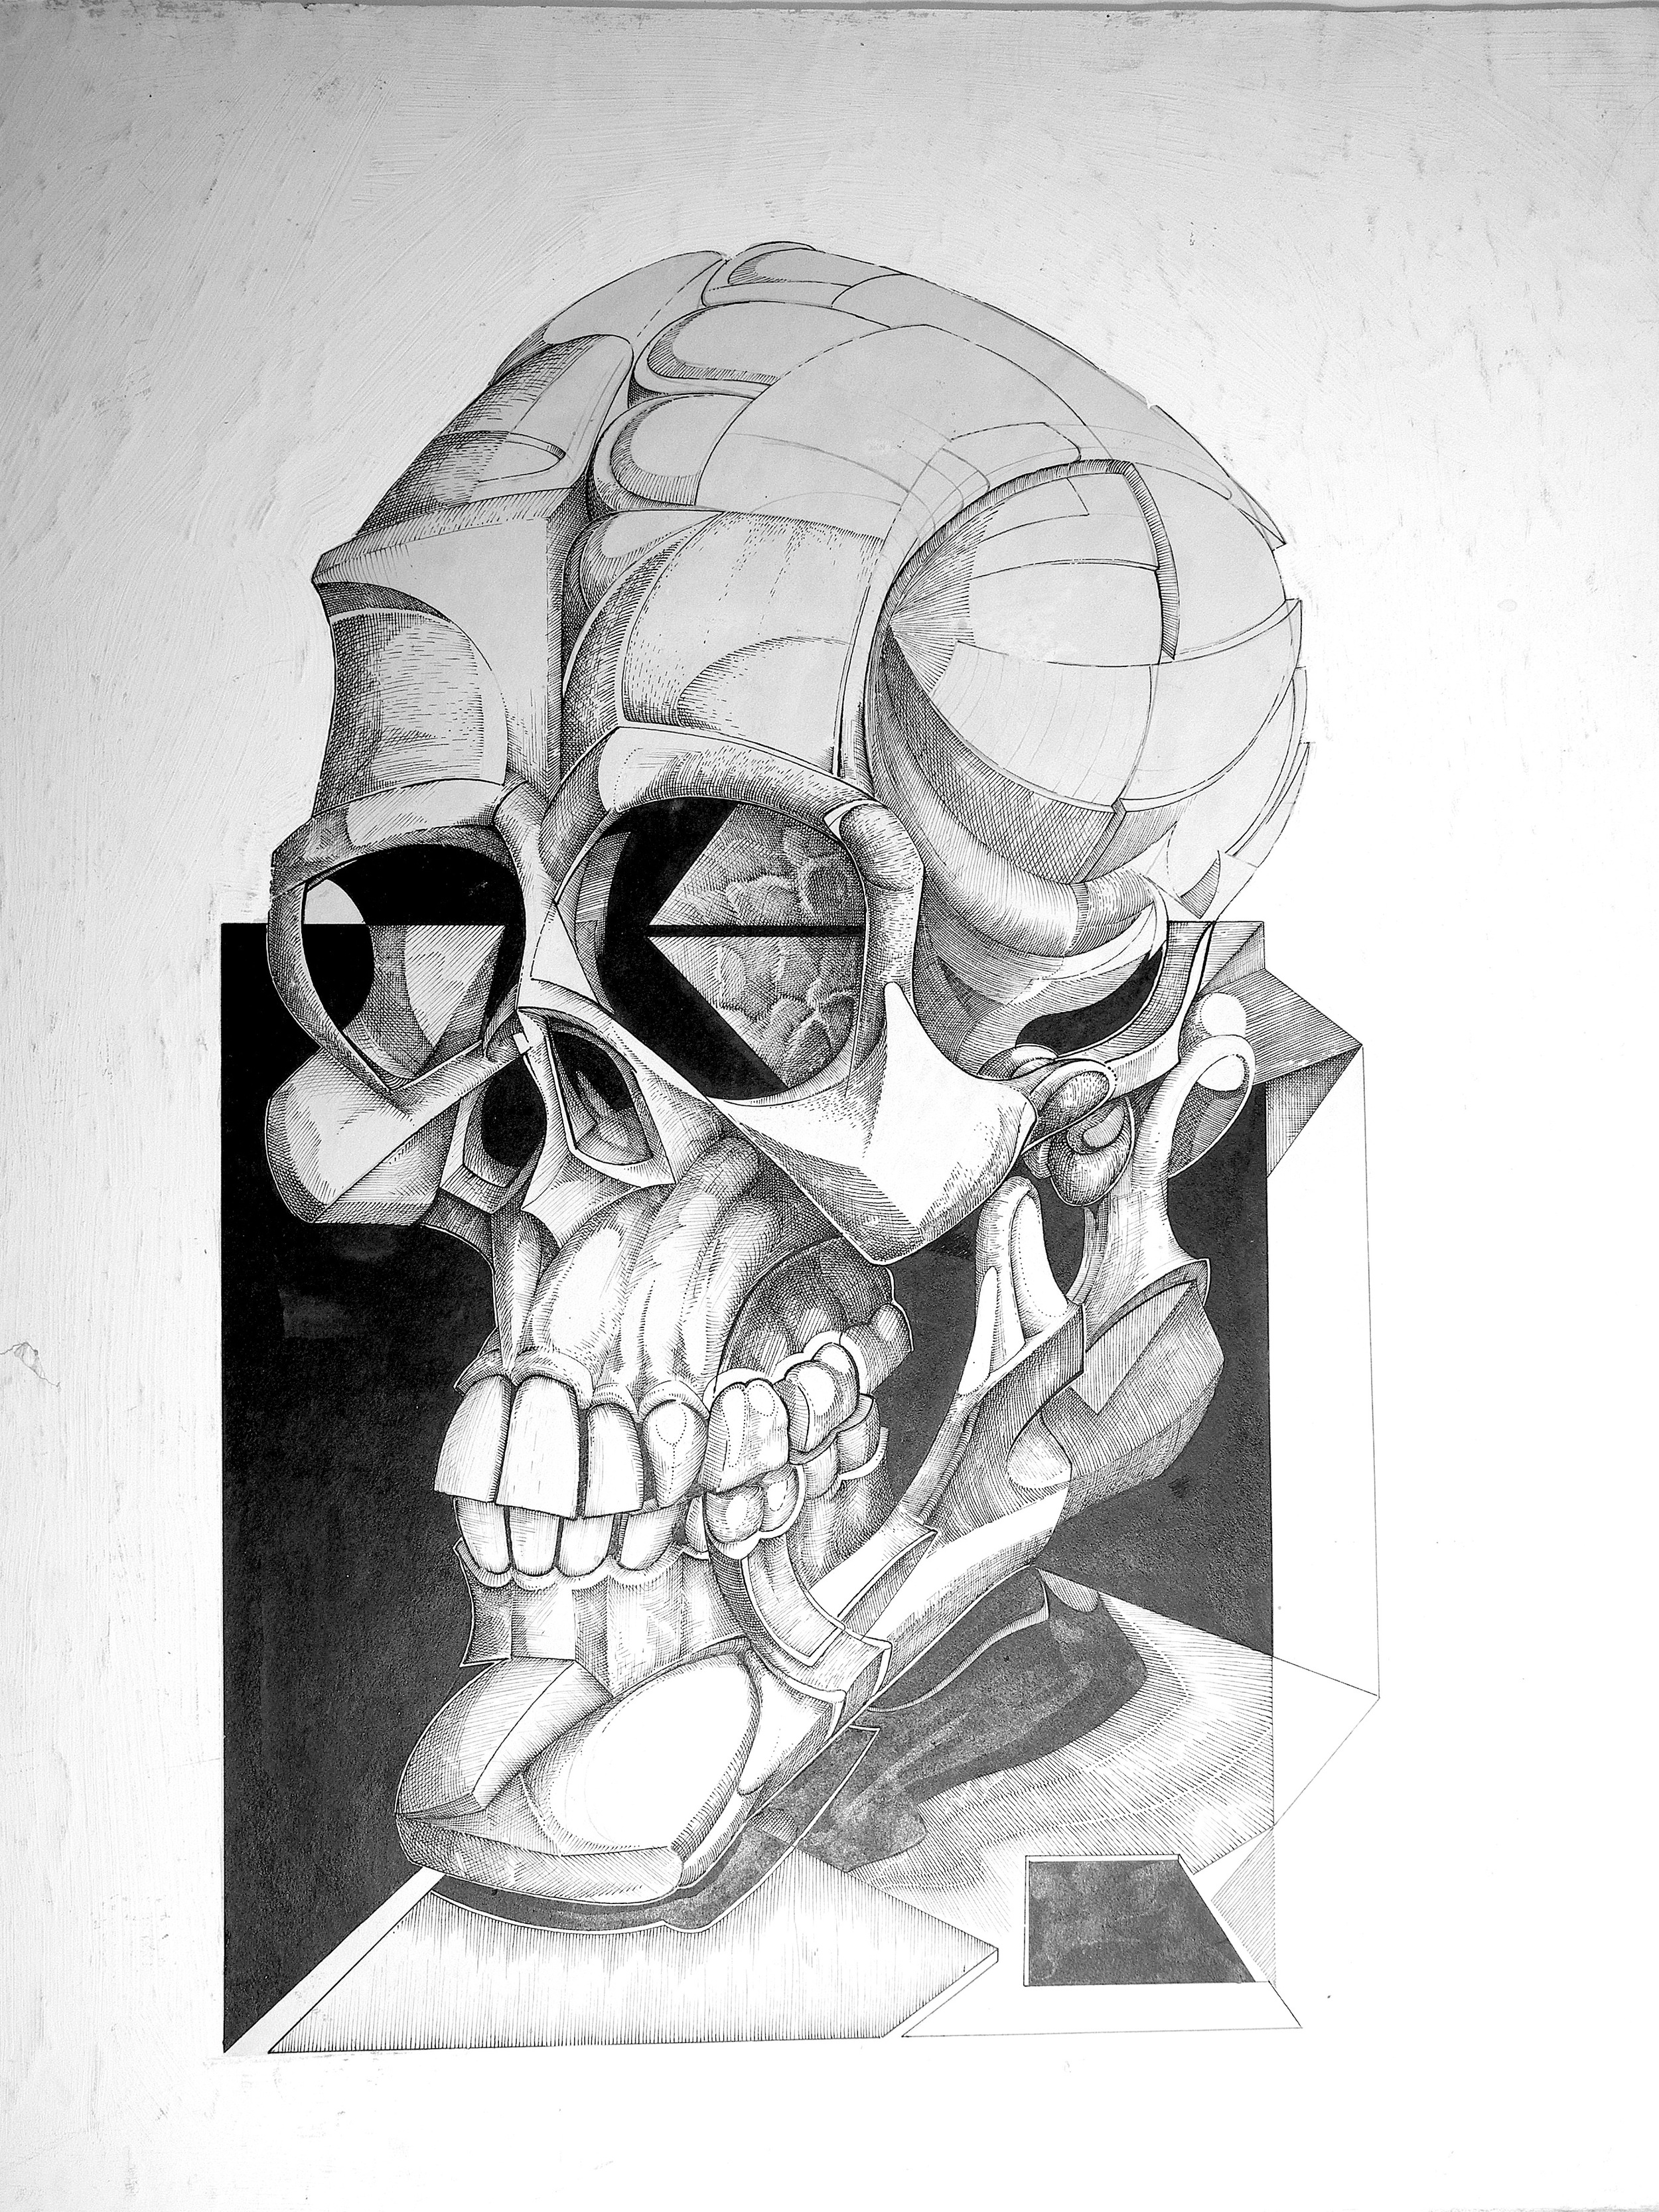 "Skull" by Vernon Courtlandt Johnson. © 1980 VCJ. All rights reserved.